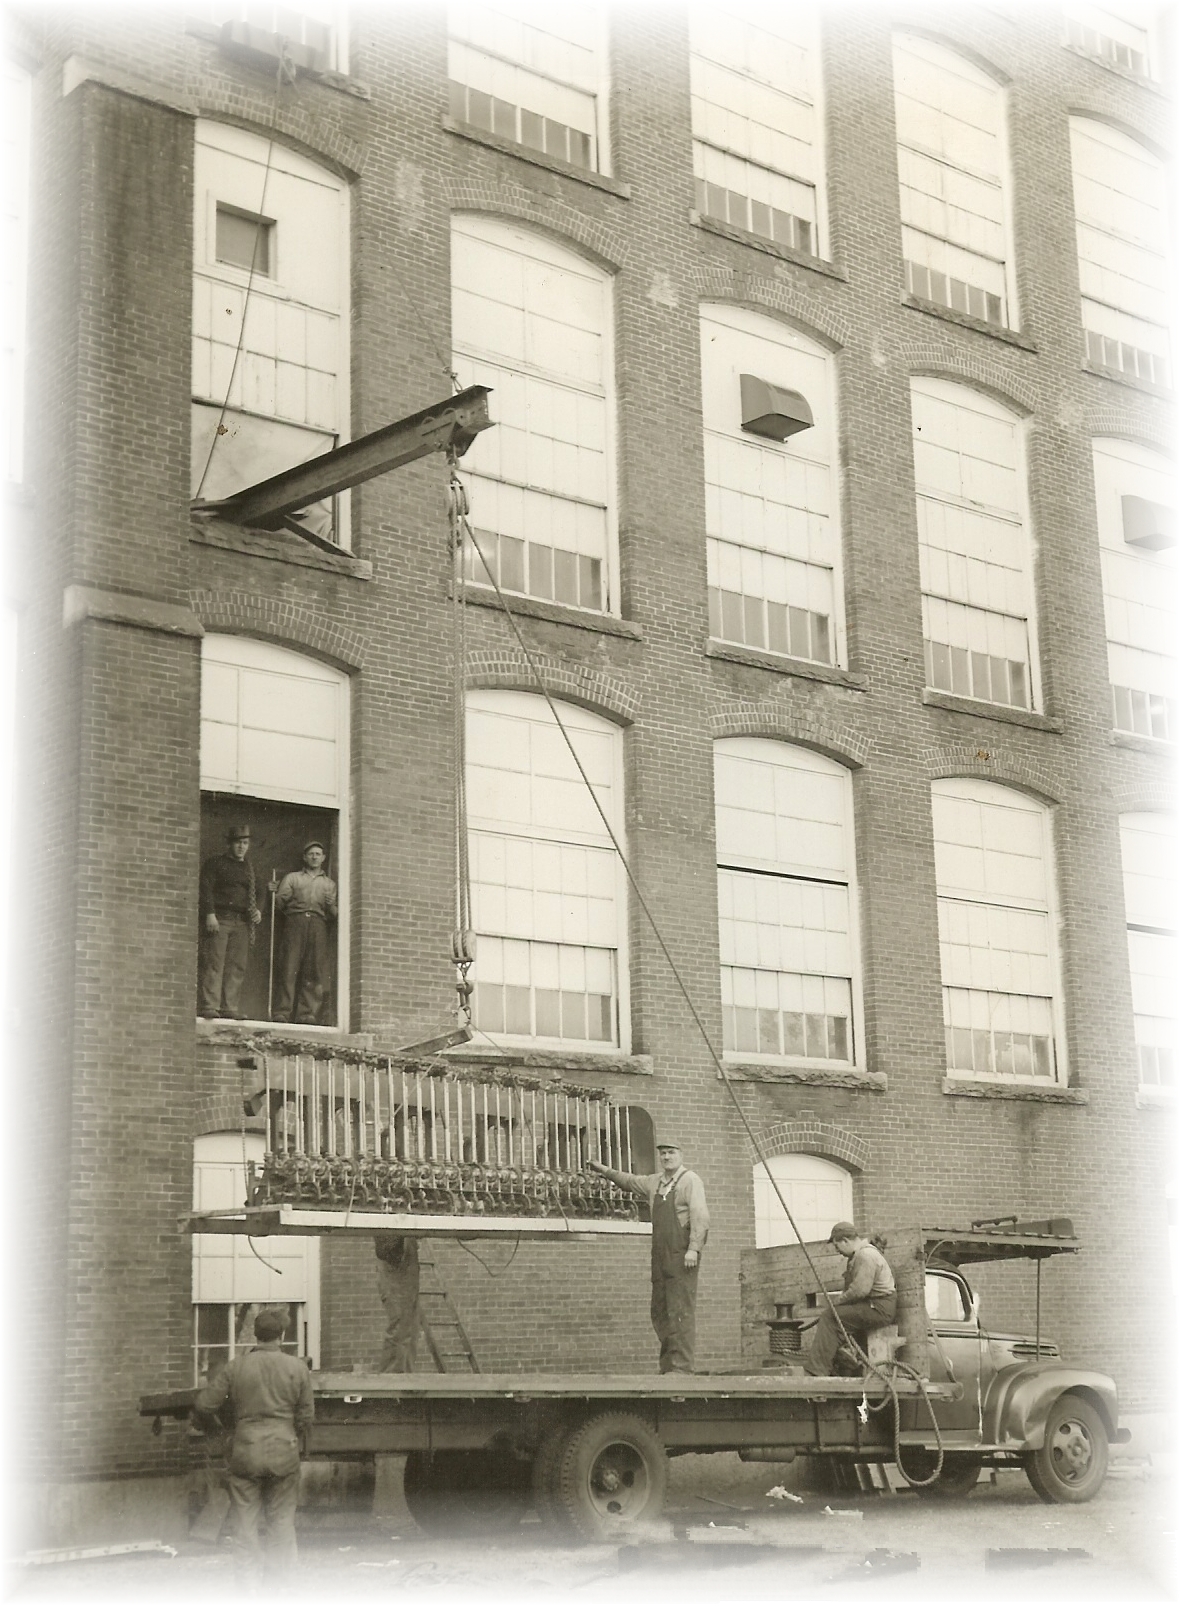 Louis P. Cote, Inc. utilizing rigging techniques to move textile machinery in Manchester NH's historic mill yards in the 1940s